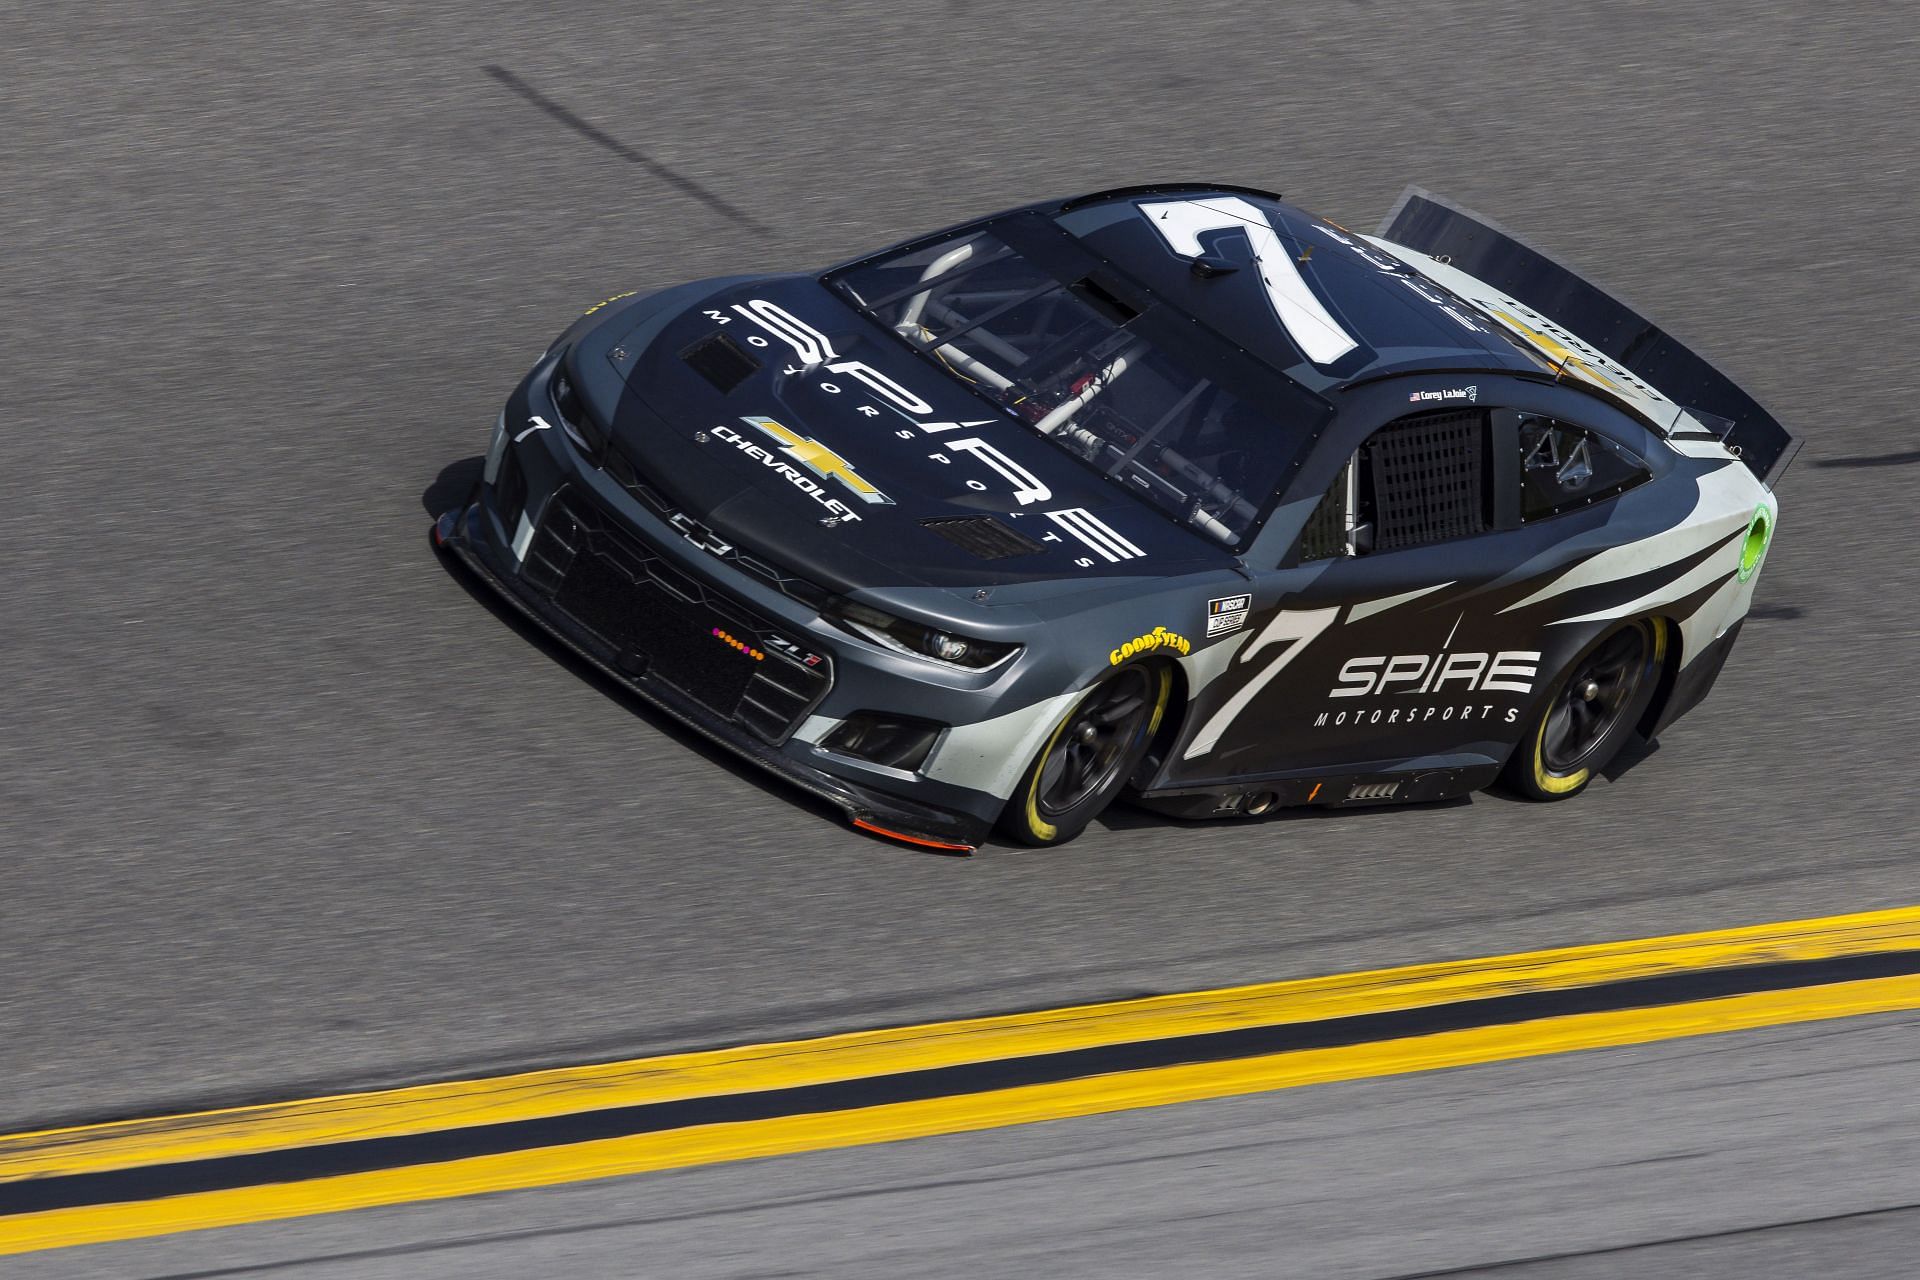 NASCAR team Spire Motorsports reportedly completes $40,000,000 acquisition of Live Fast Motorsports charter